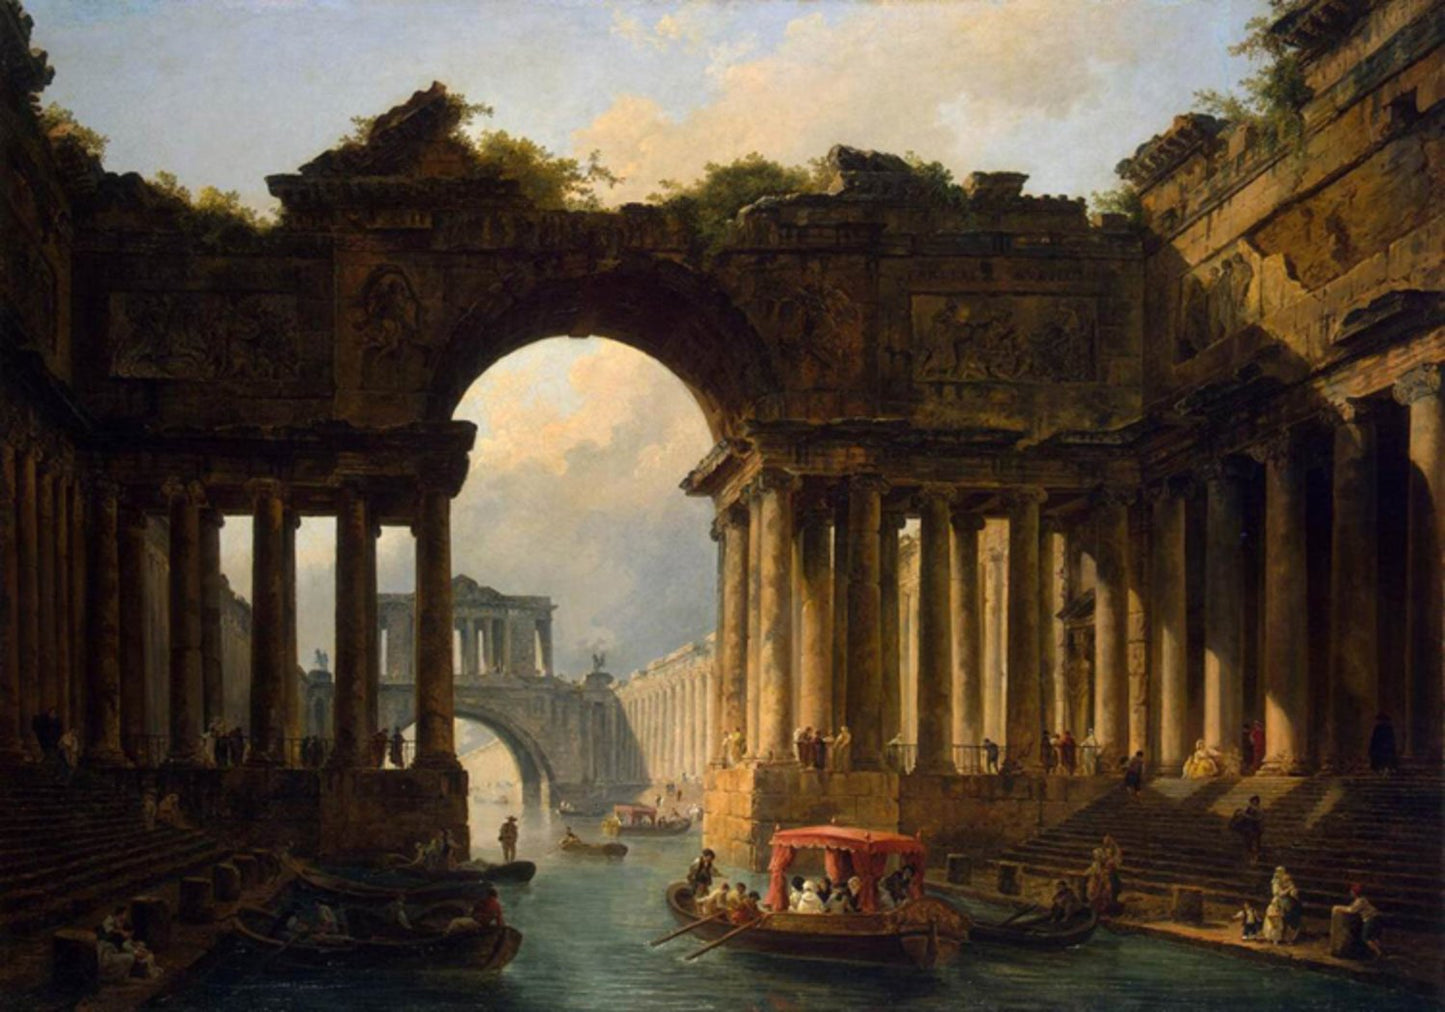 Architectural Landscape with a canal,Hubert Robert,60x42cm